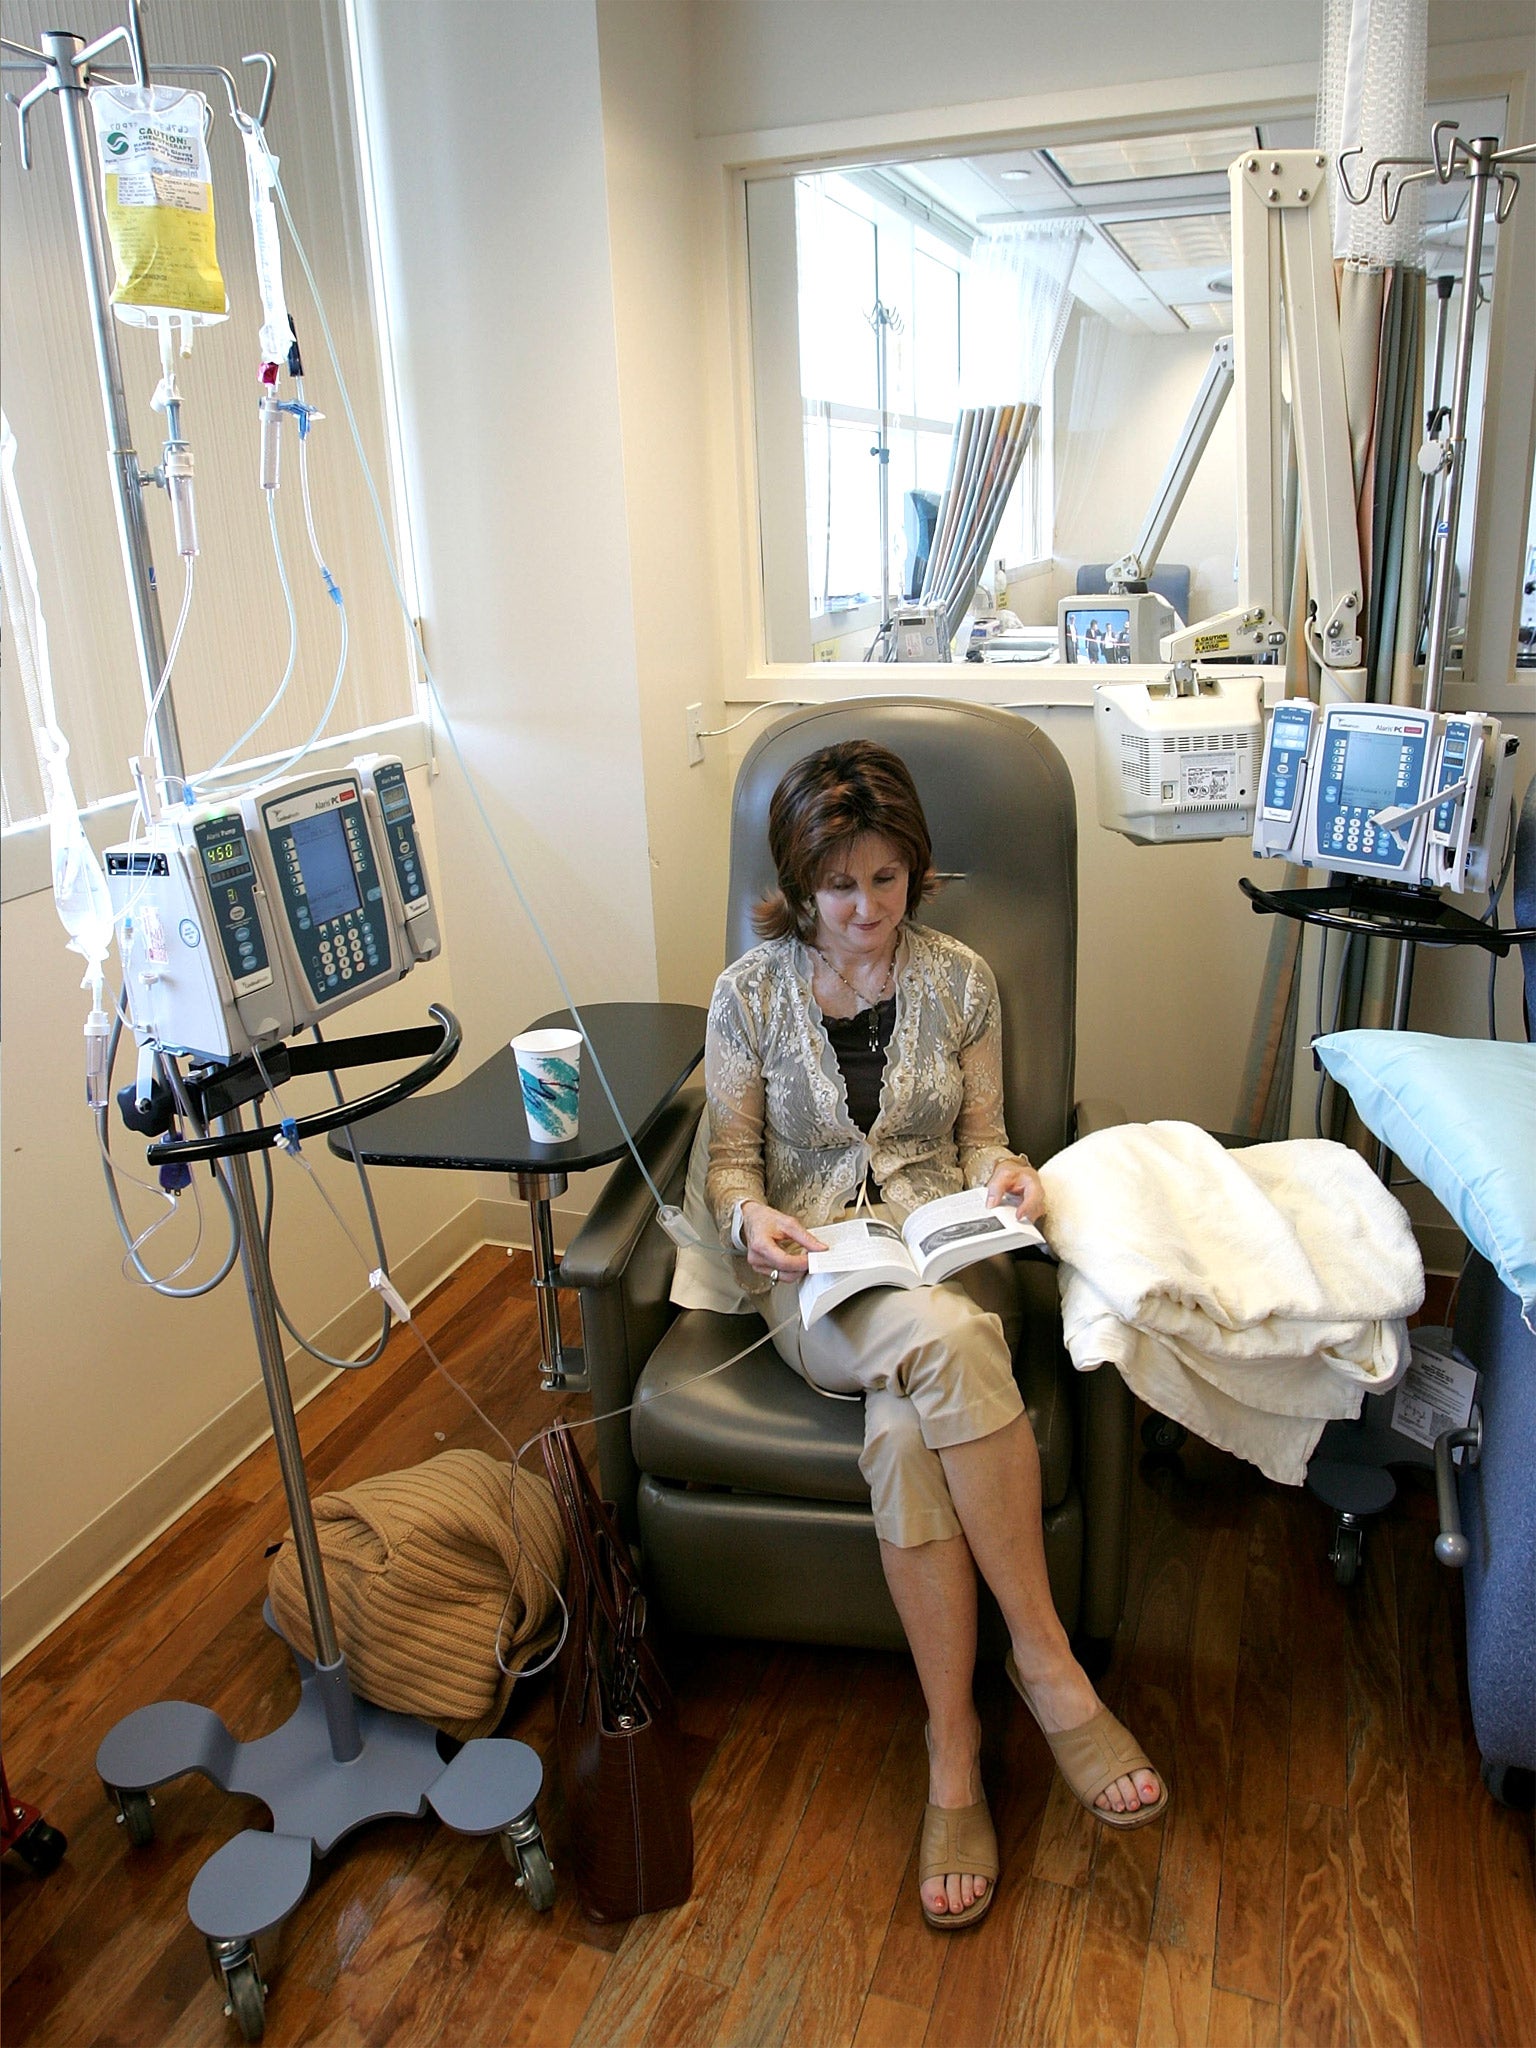 A cancer patient receives chemotherapy treatment